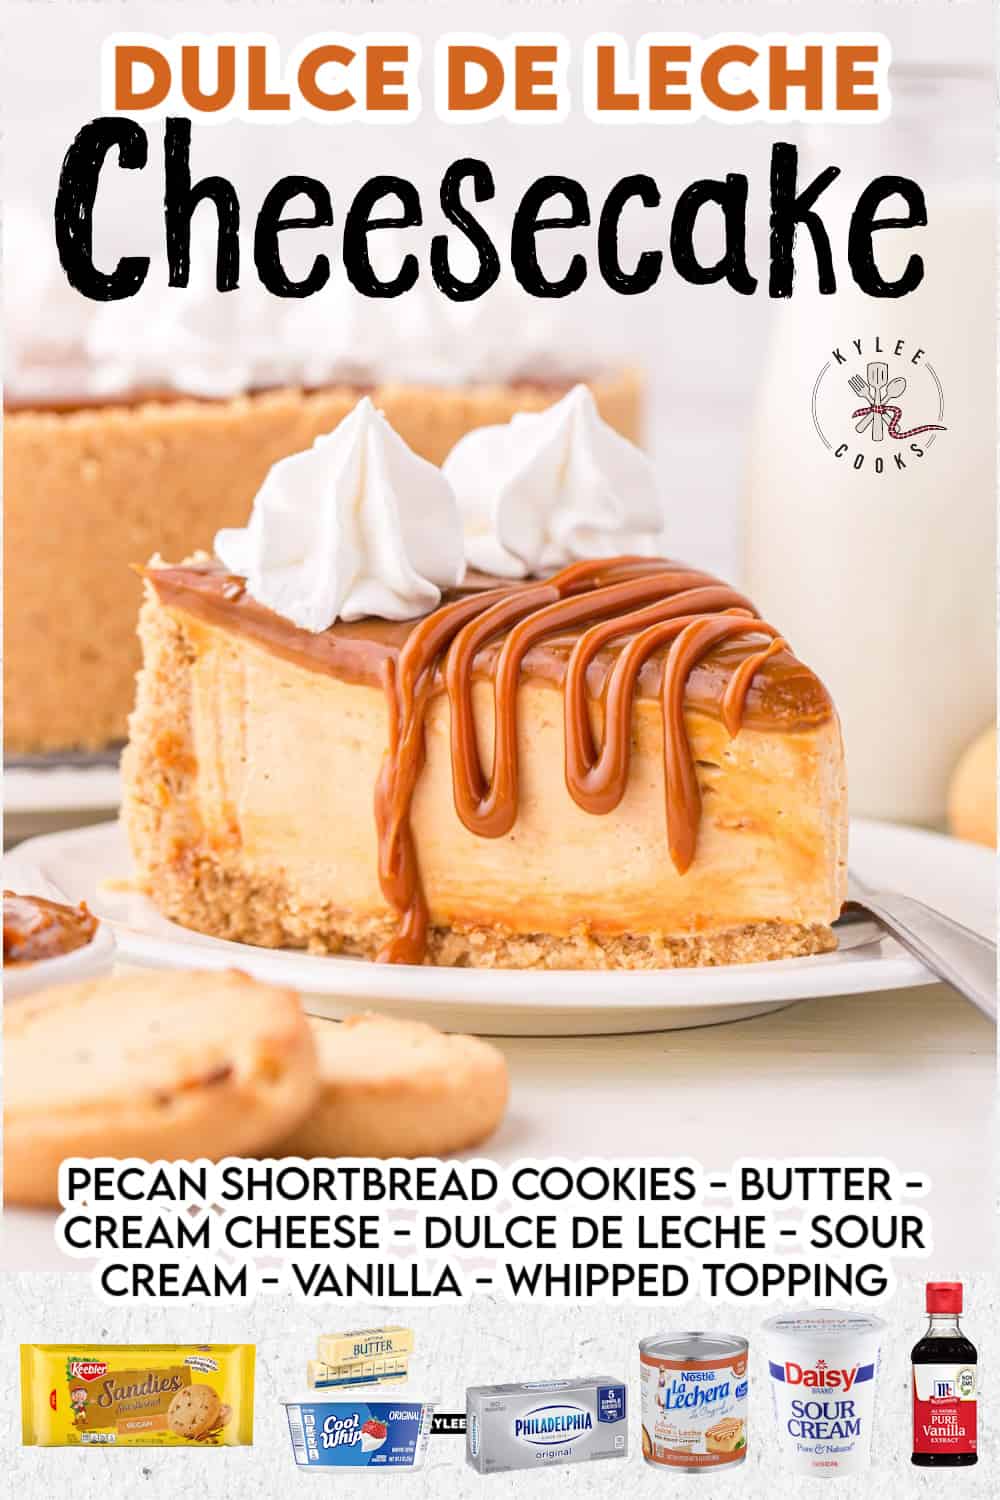 dulce de leche cheesecake with recipe name and ingredients overlaid in text and images.